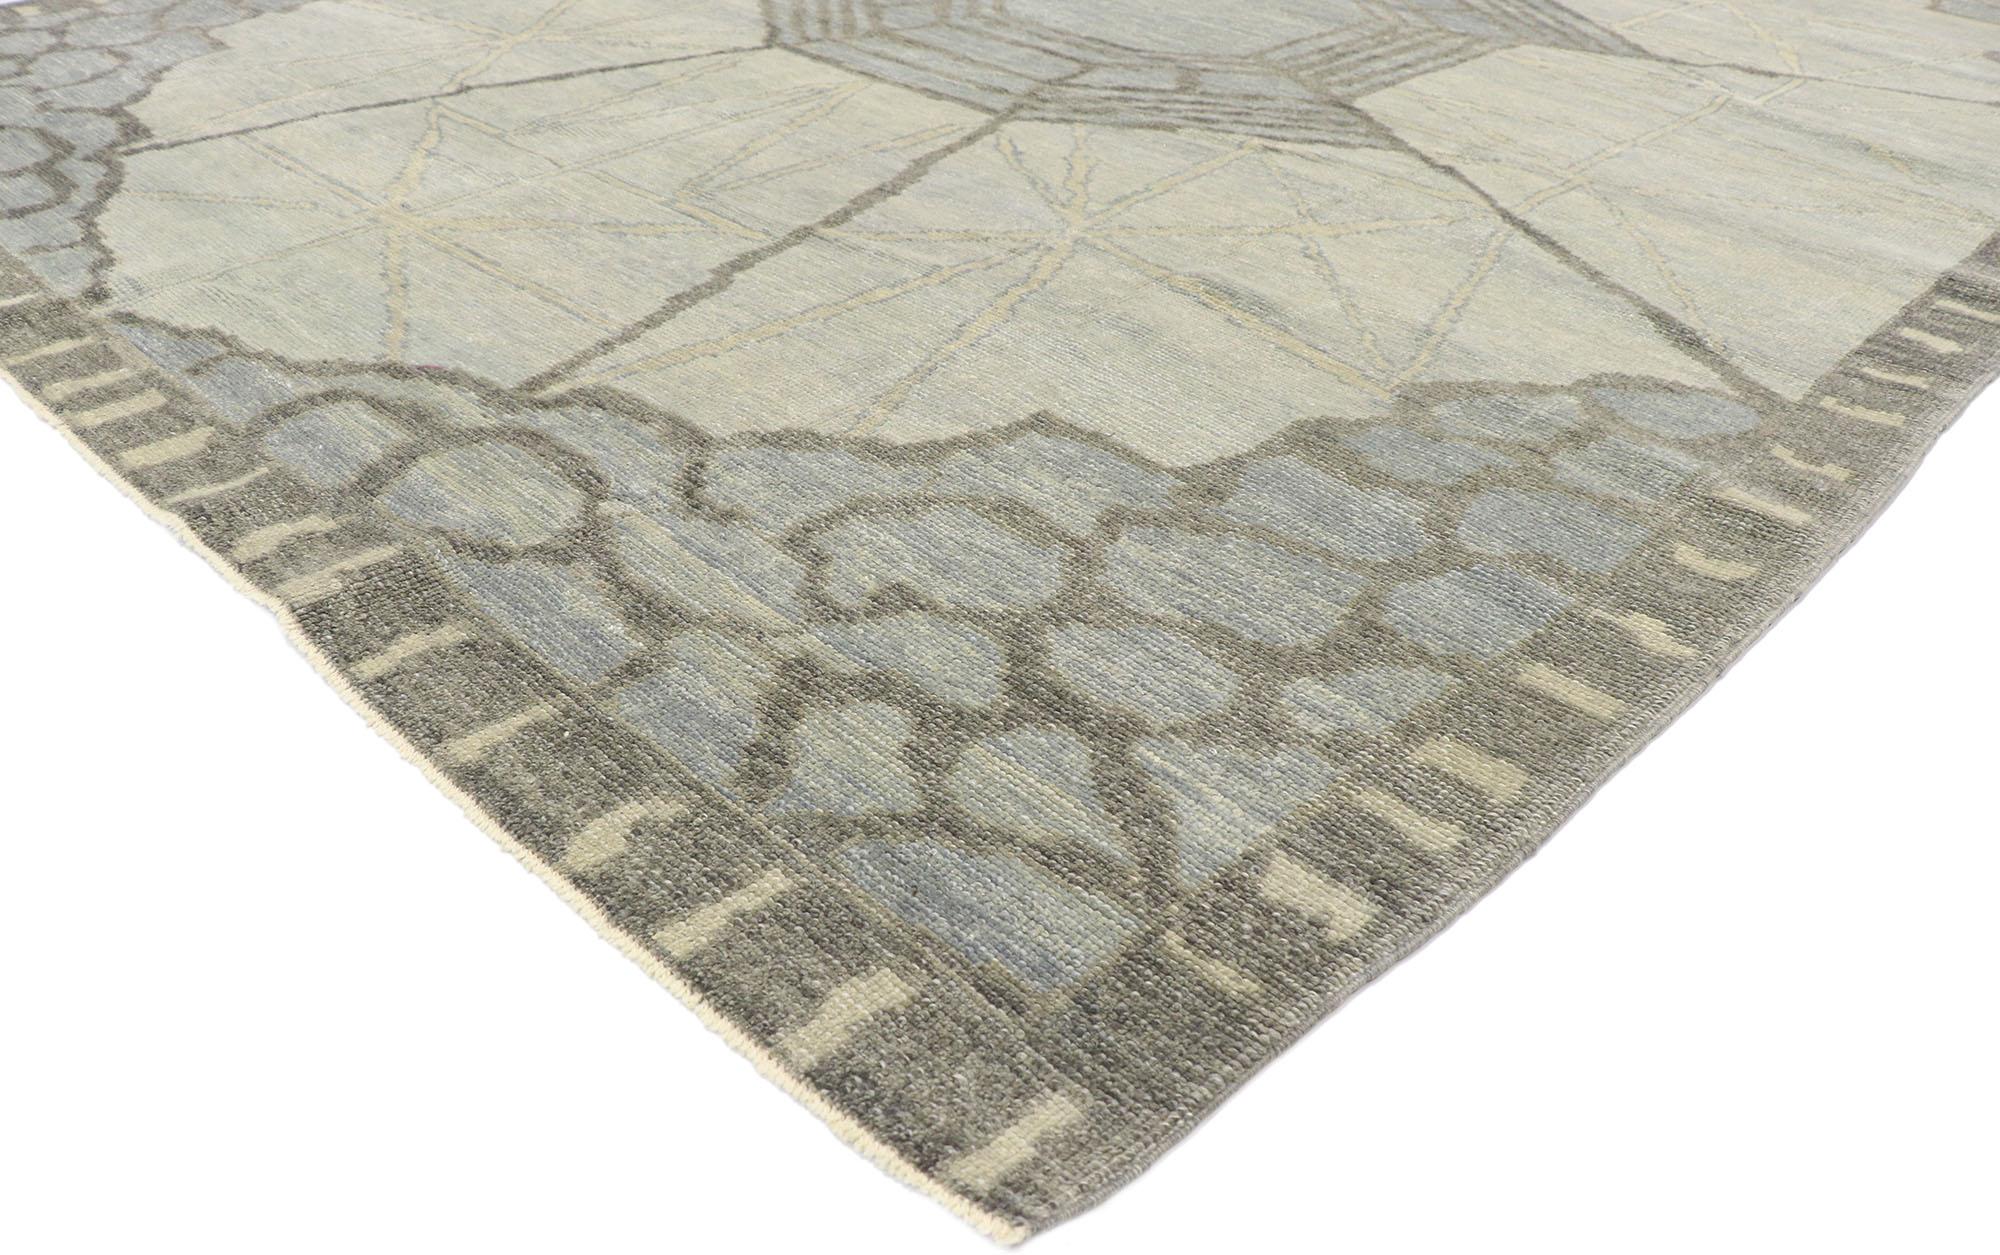 53501, new contemporary Turkish Oushak rug inspired by Zeki Muren. With its geometric pattern, bold form and subdued colors, this hand knotted wool contemporary Turkish Oushak rug beautifully embodies Abstract Expressionist style. Showcasing a